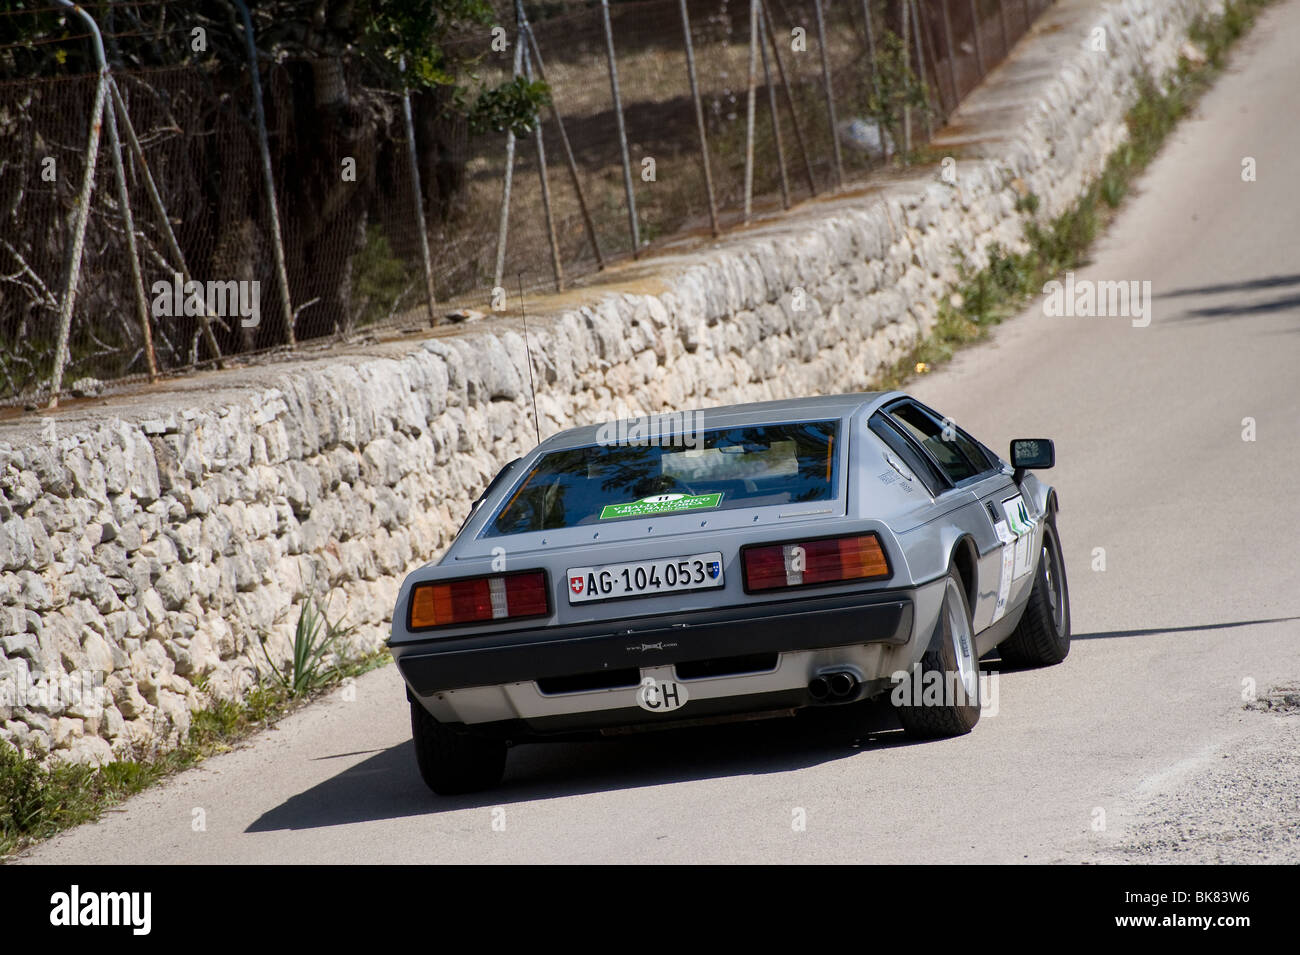 1973 Lotus Esprit classic sports car taking part in a rally in Spain Stock  Photo - Alamy